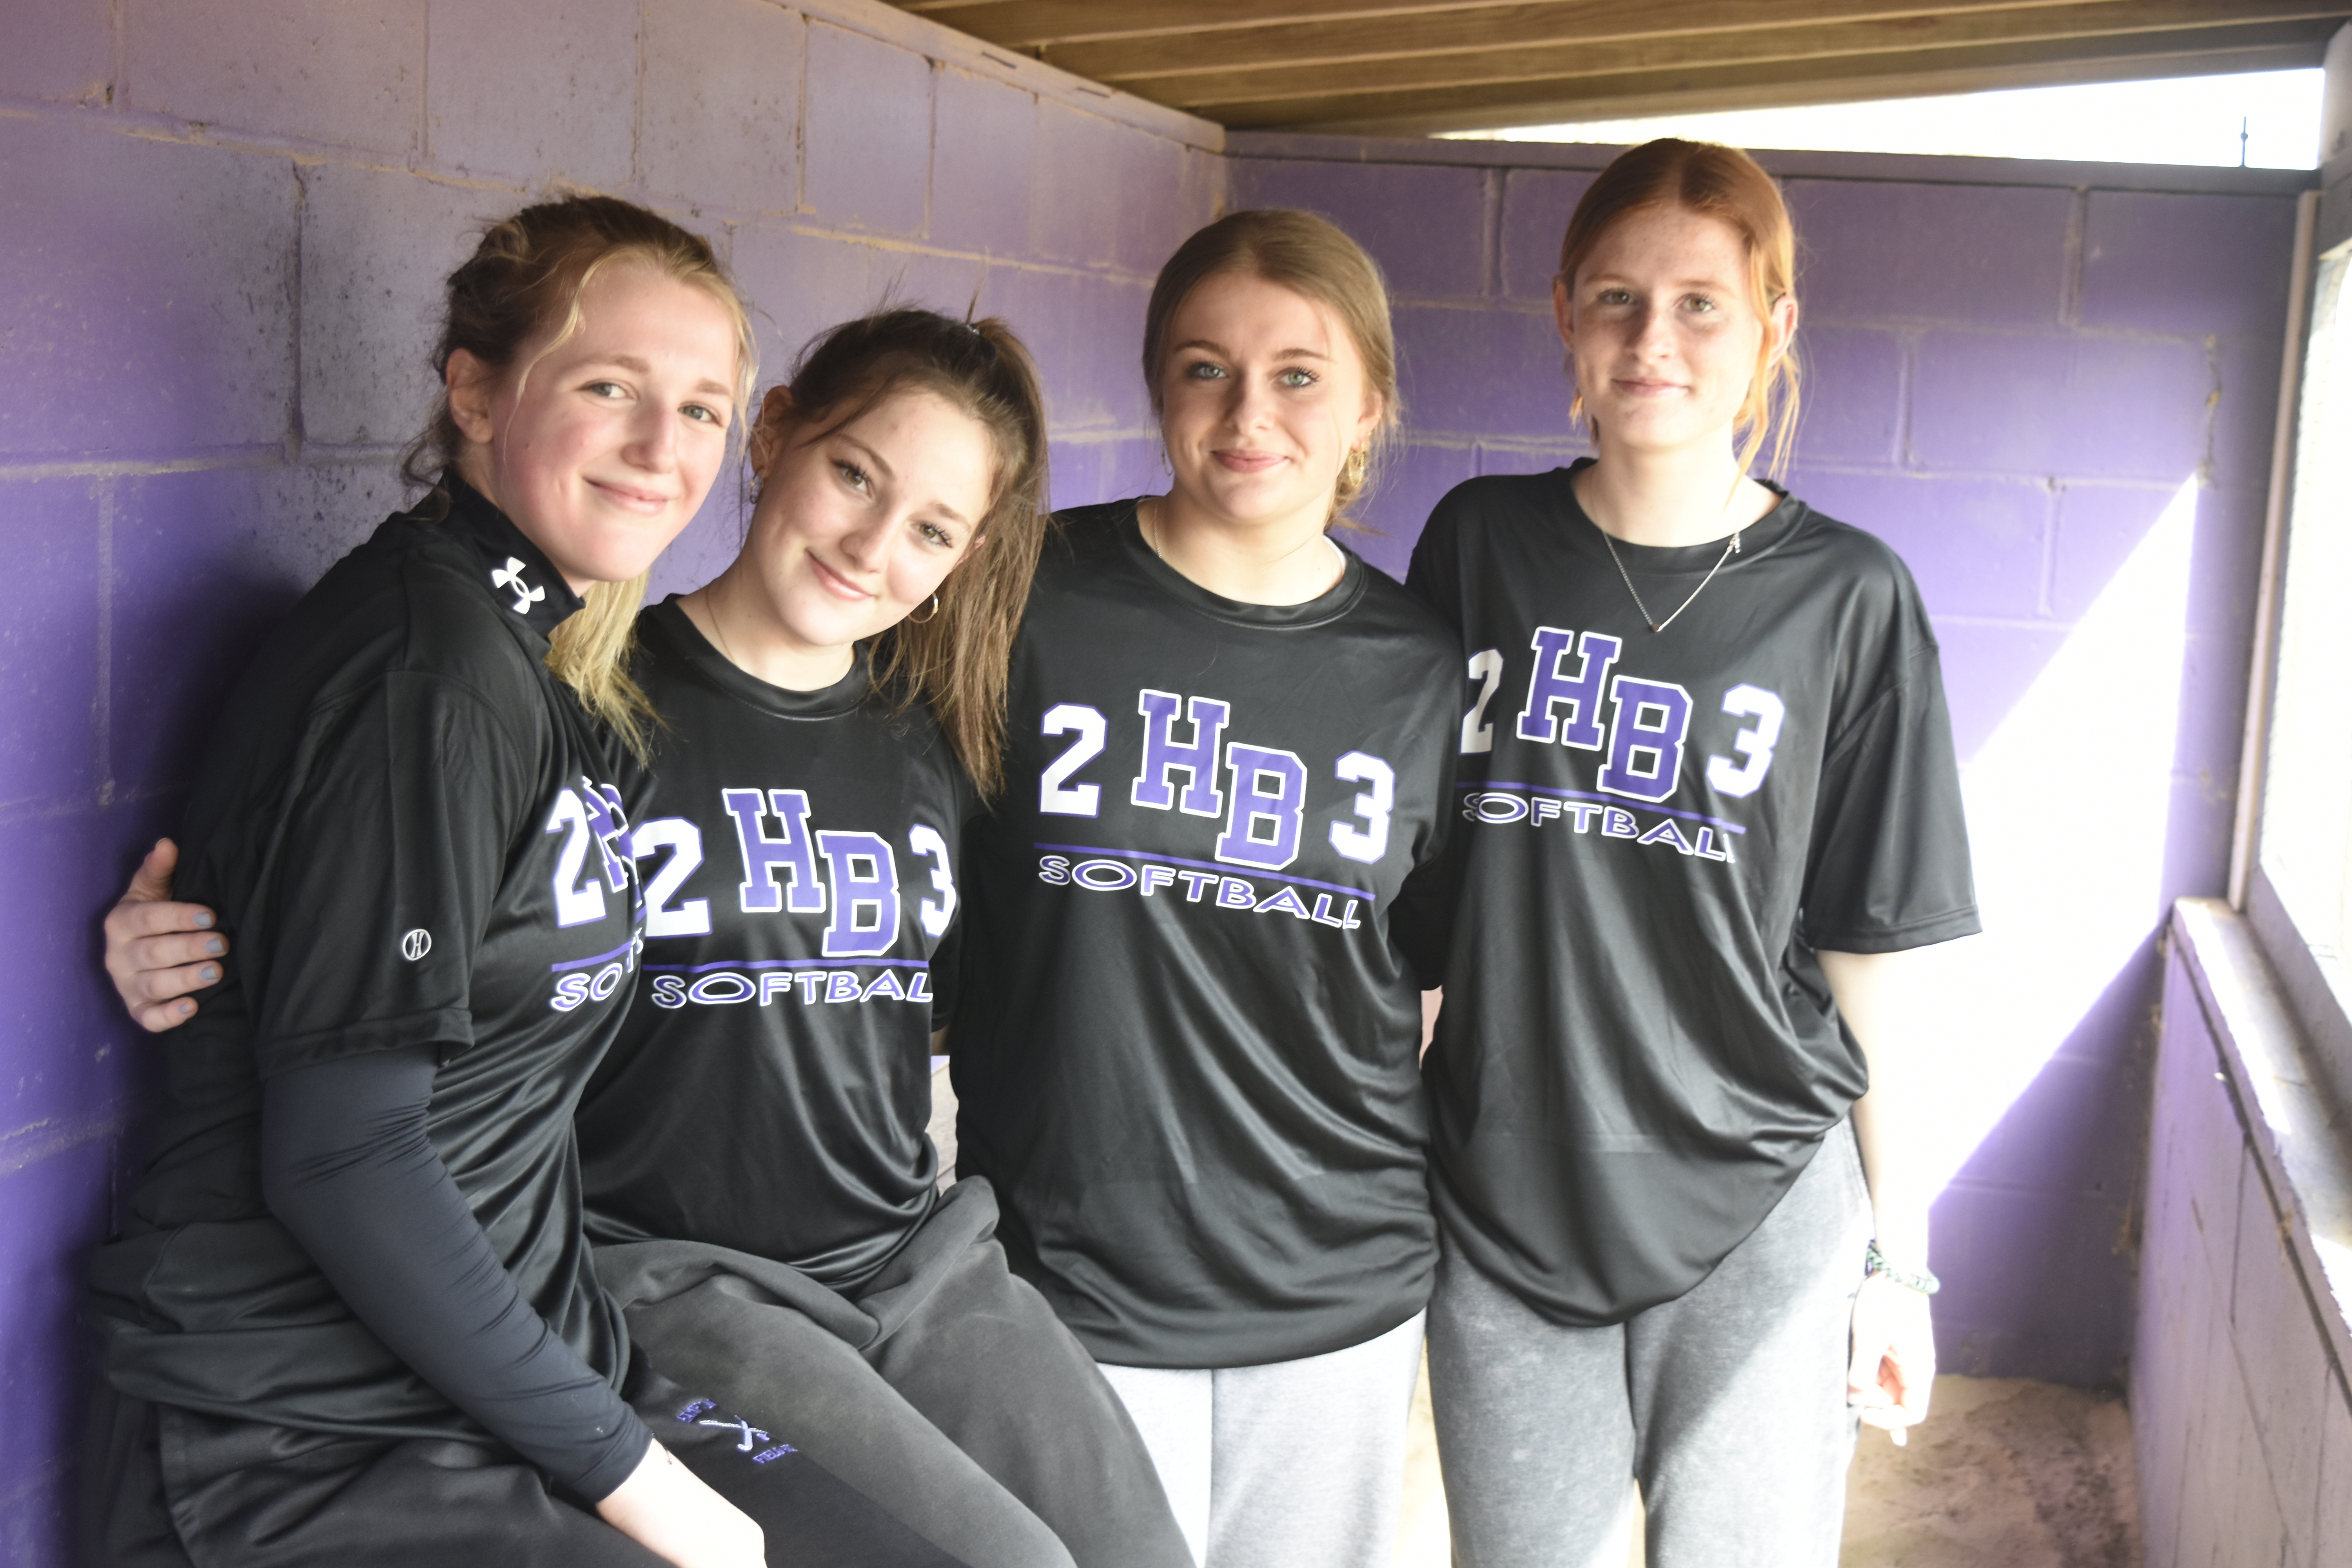 Returning players for the Baymen this season include, from left, Chase Dunkirk, Maddie Warn, Julia Brandeis and Shea Egan.   DREW BUDD